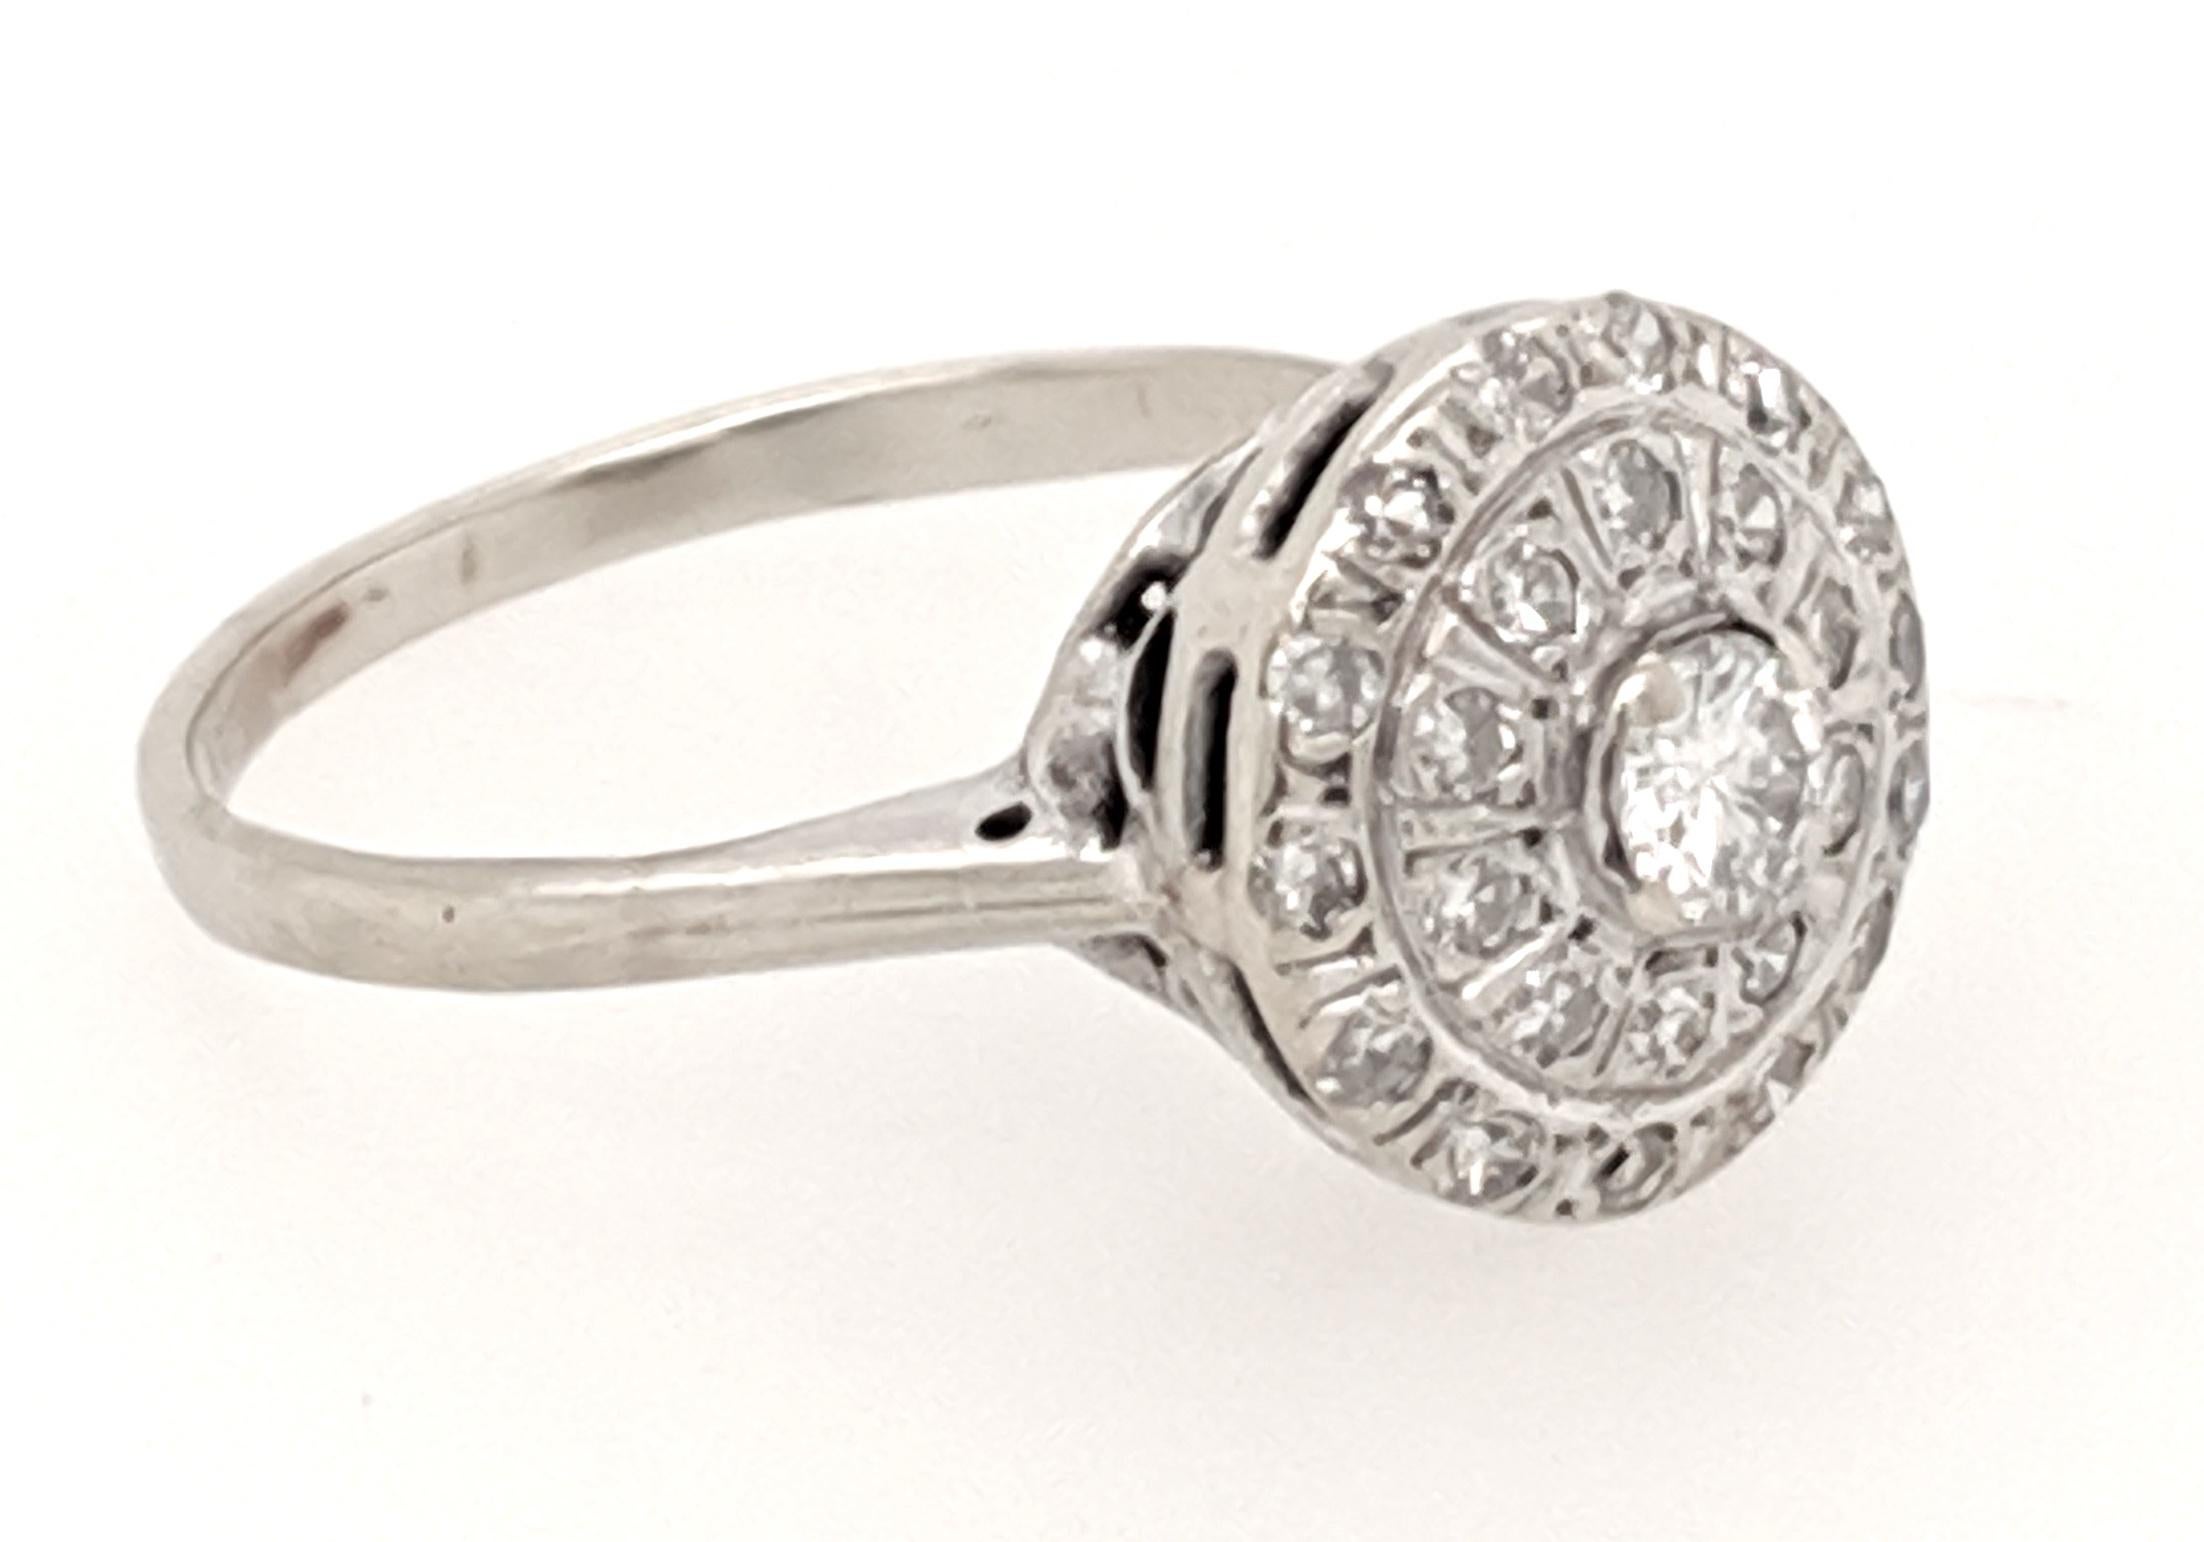 An Edwardian diamond ring crafted in 14k white gold featuring (1) round diamond weighing .20ct with very good color 